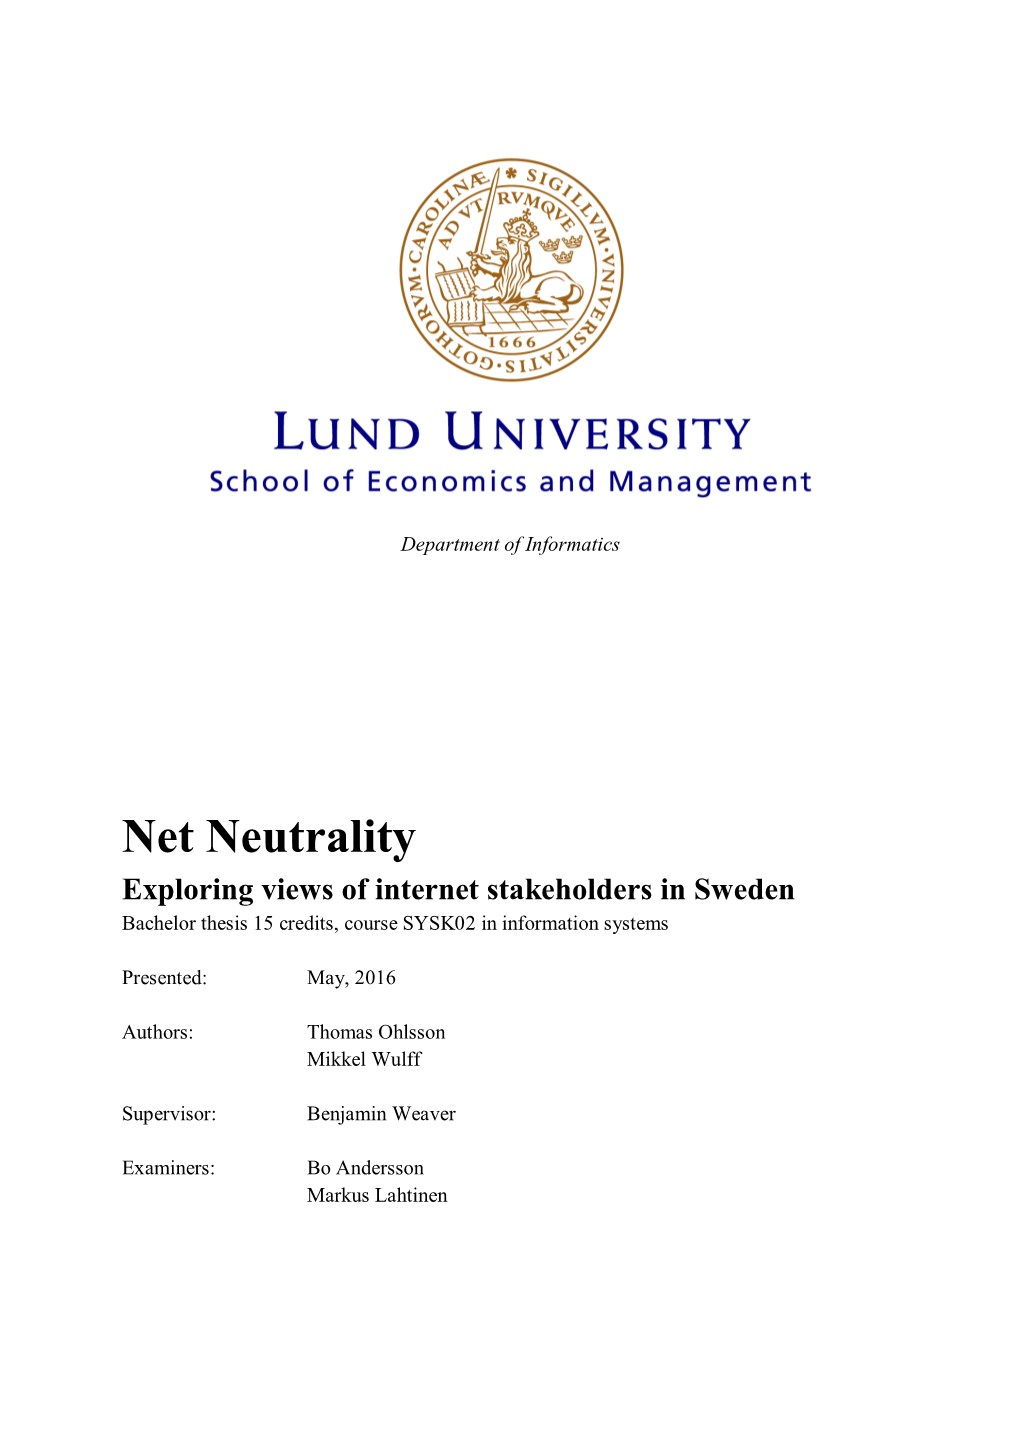 Net Neutrality Exploring Views of Internet Stakeholders in Sweden Bachelor Thesis 15 Credits, Course SYSK02 in Information Systems